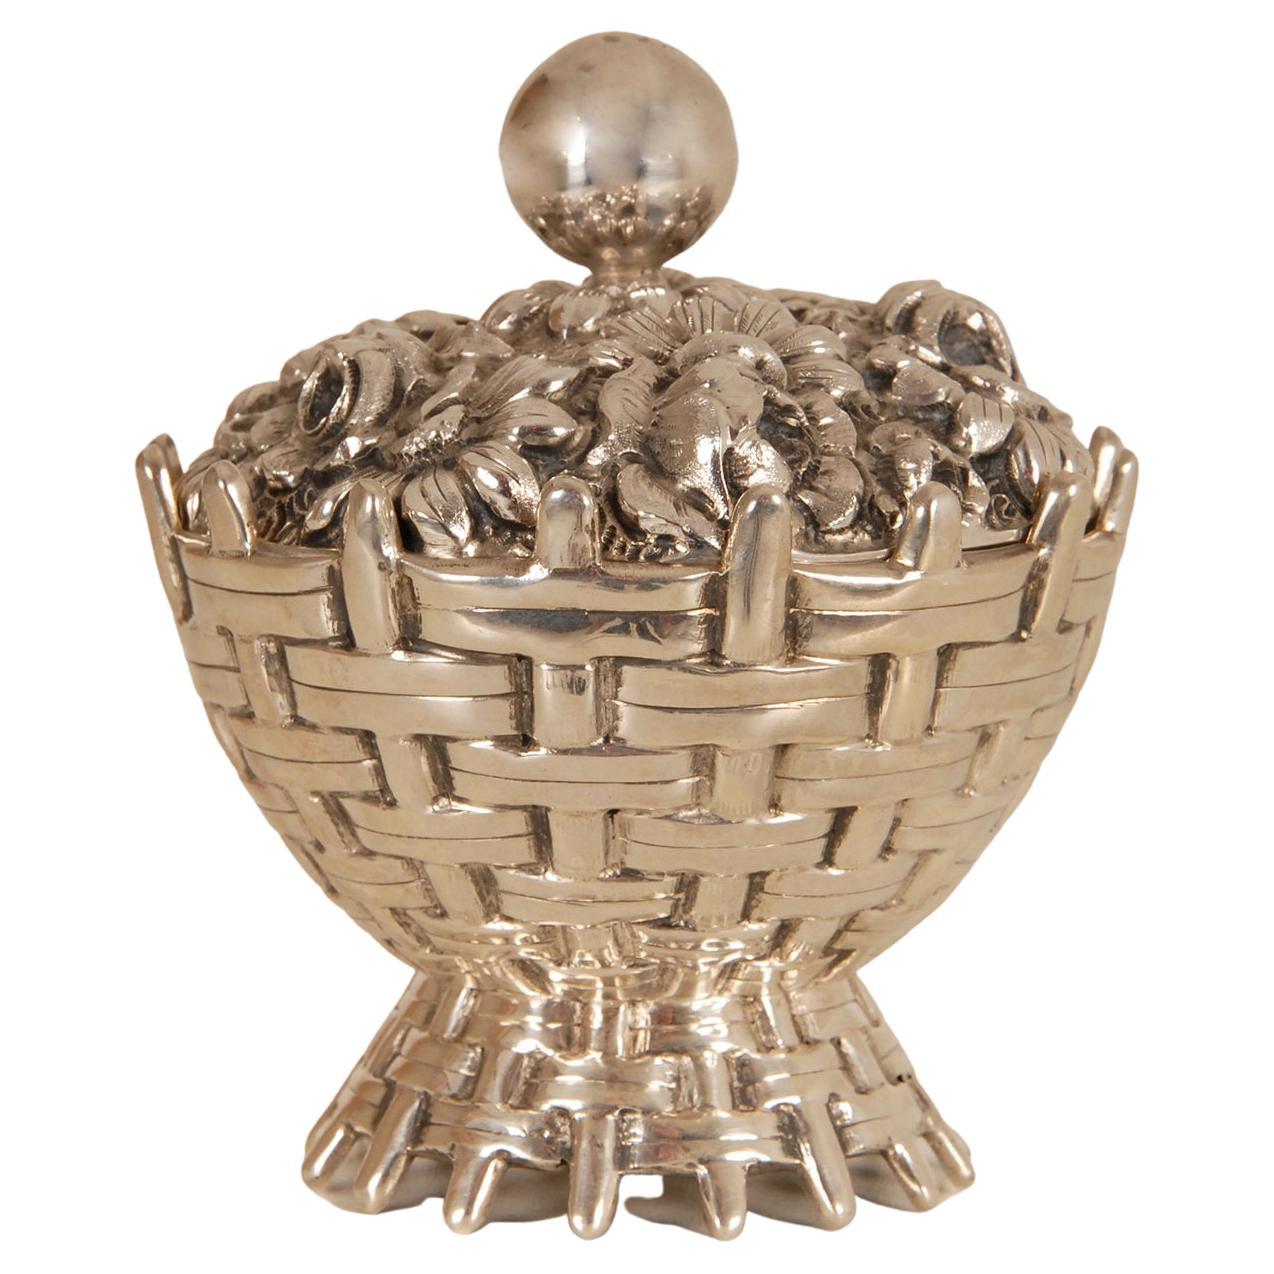 Art Deco silver decorative box -Jewelry box - bonbon box
Style: Art deco, vintage, antique, Portugees, neoclassical, Mid Century
The body of the box depicting a woven basket
Its cover is modeled as a bunch flowers and a sphere knob finial
On the